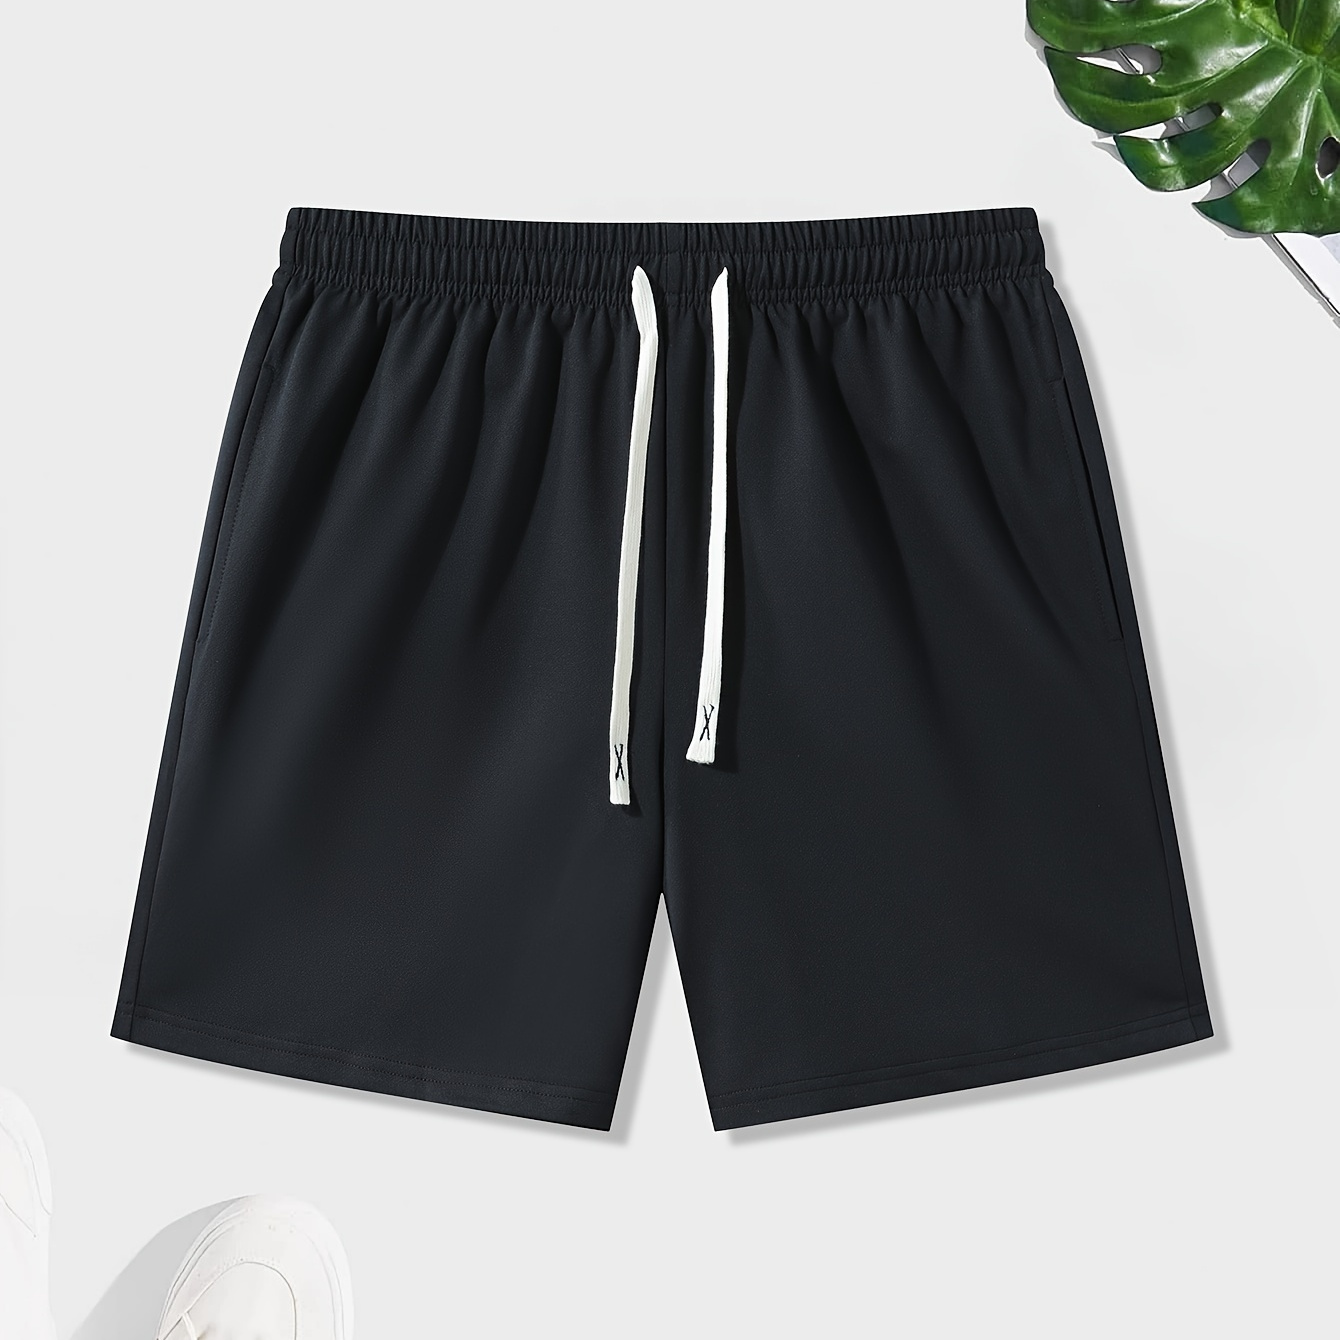 

Men's Casual Simple Solid Color Active Shorts, Chic Drawstring Sports Shorts For Summer